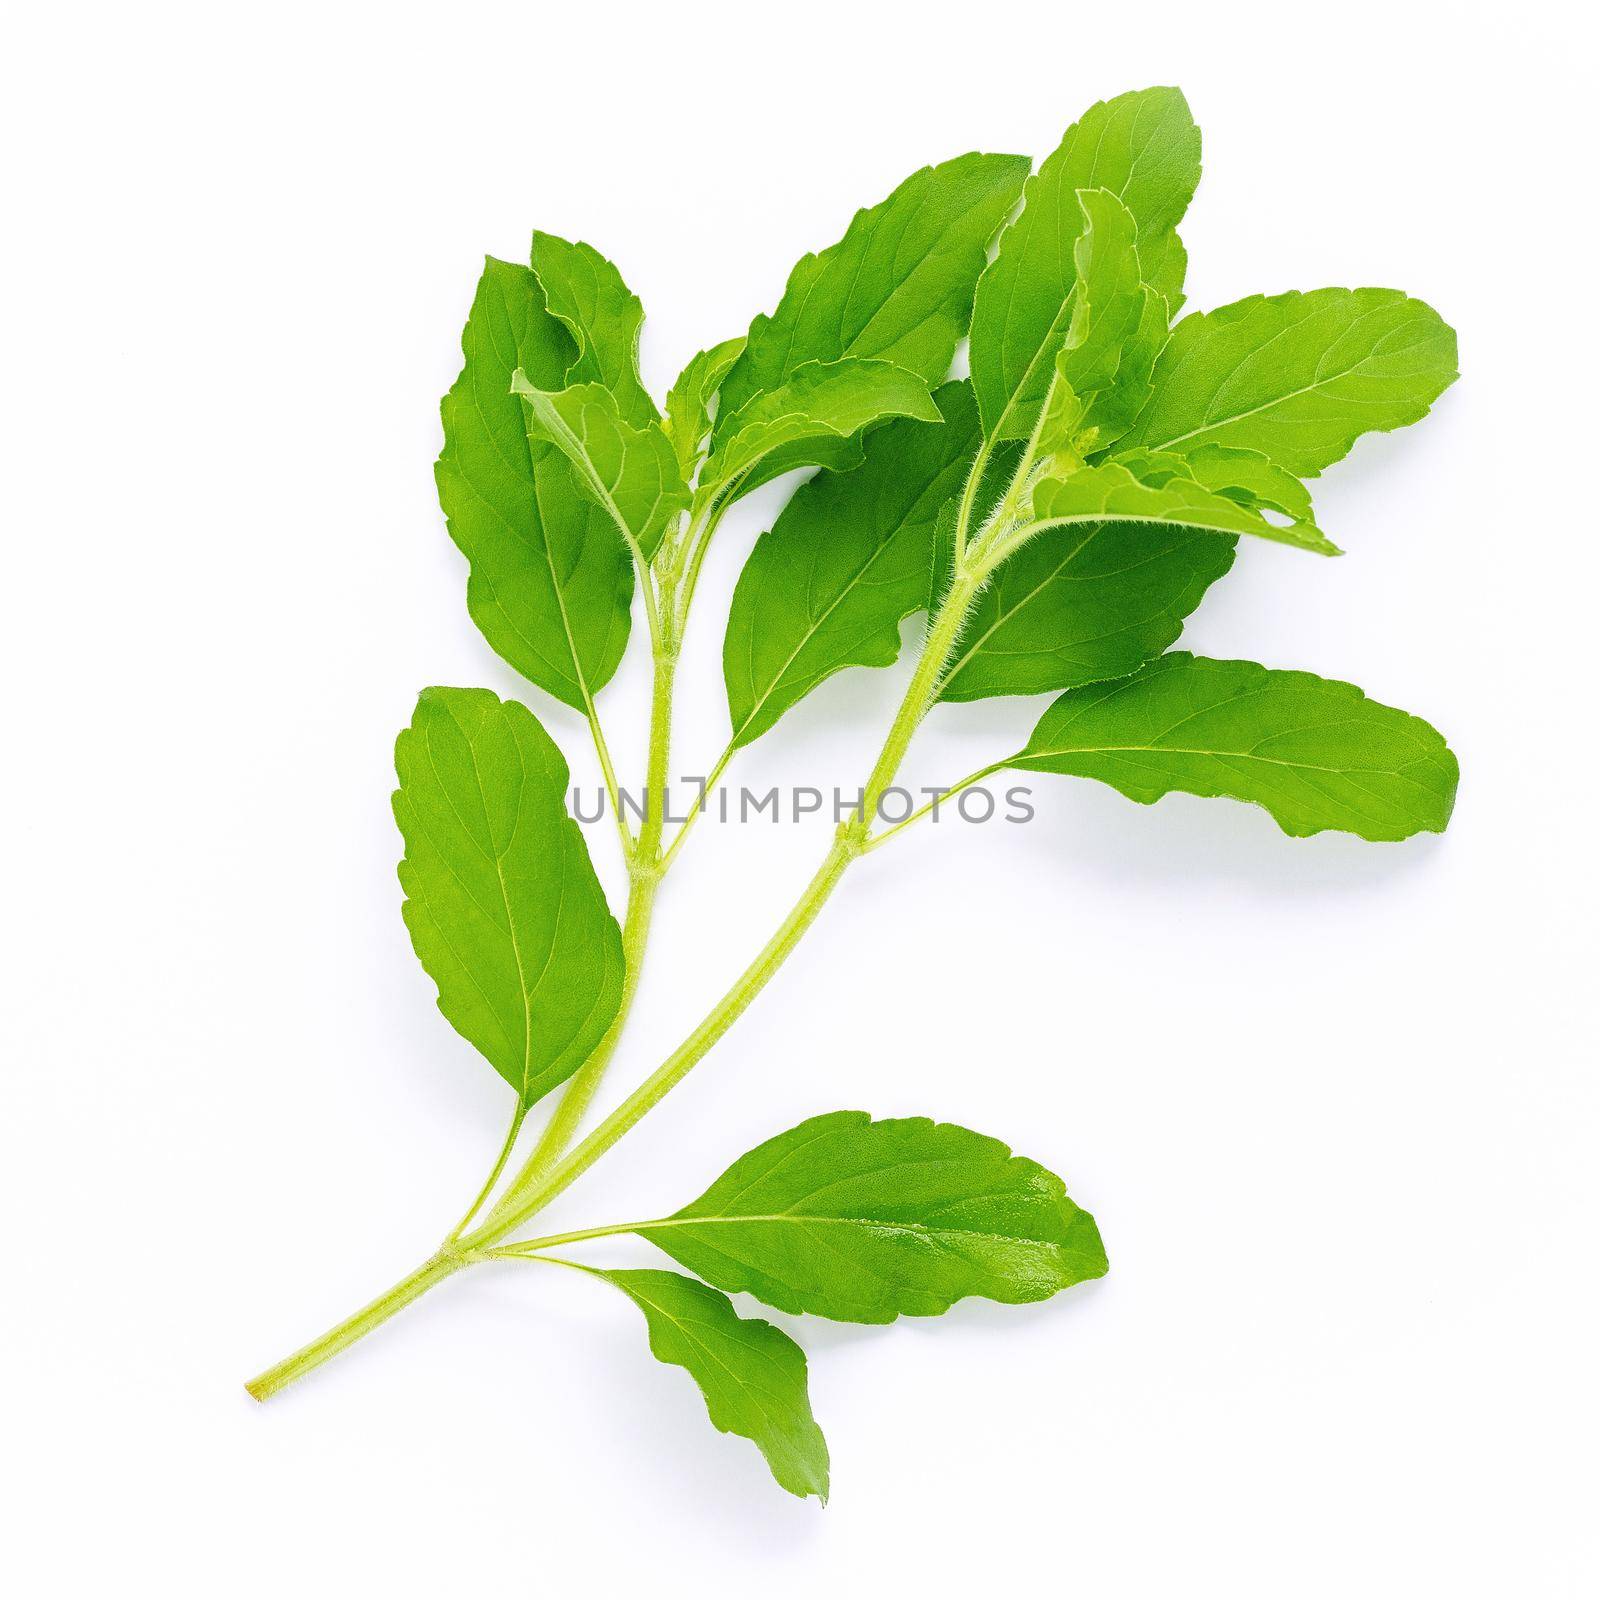 Blanch of fresh holy basil leaves isolate on white background . by kerdkanno